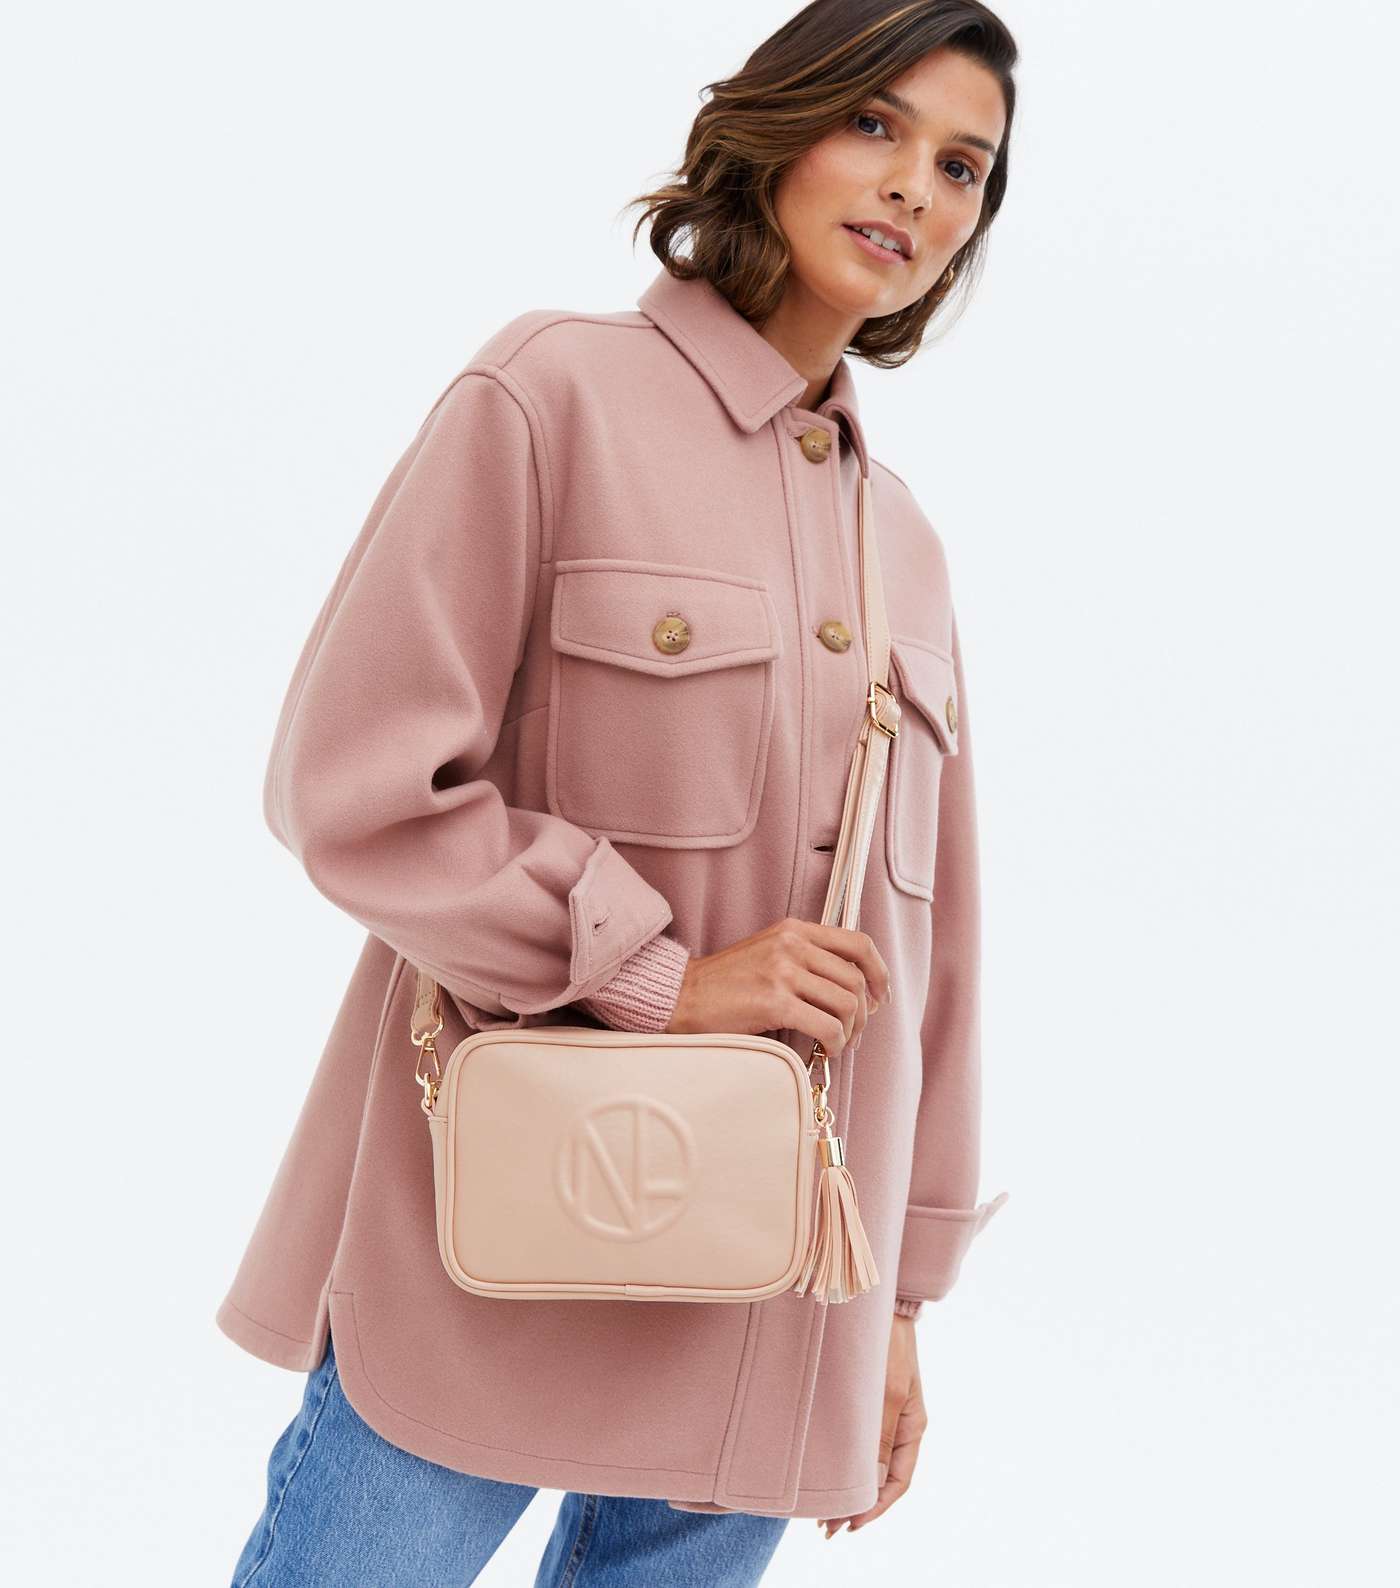 Pale Pink Leather-Look Embossed Cross Body Bag Image 2